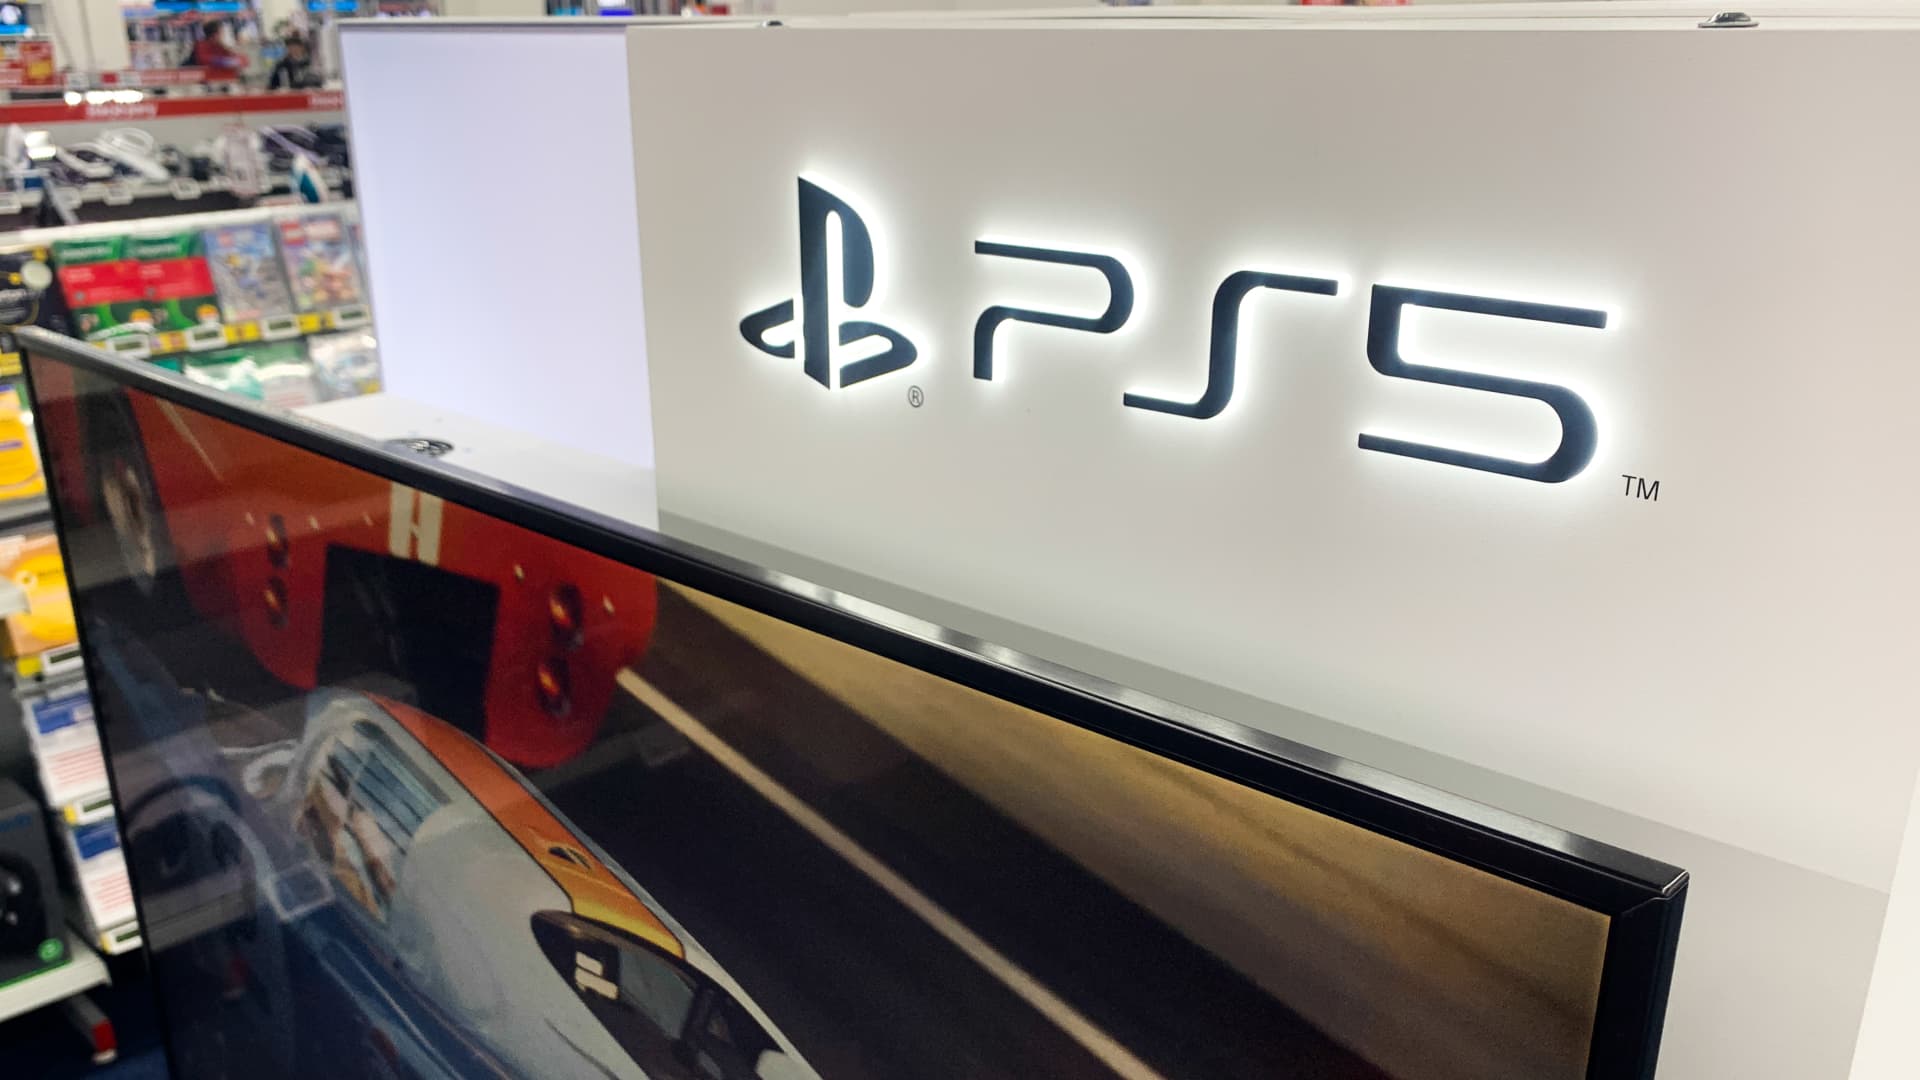 The PlayStation 5 logo pictured at a store in Krakow, Poland.